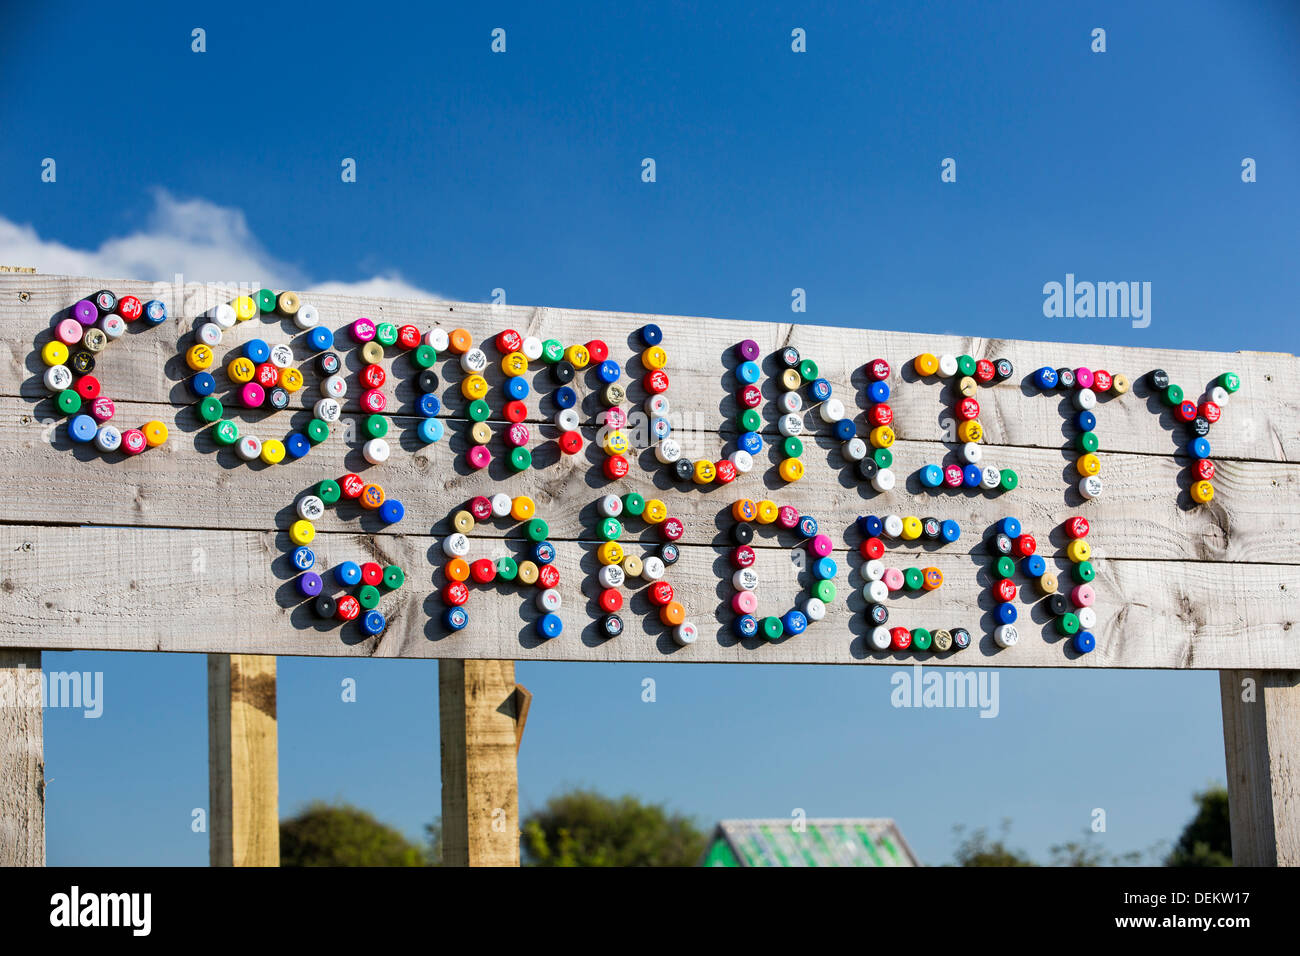 The community garden spelt out with plastic bottle tops at Mount Pleasant Ecological Park, Porthtowan, Cornwall, UK. Stock Photo